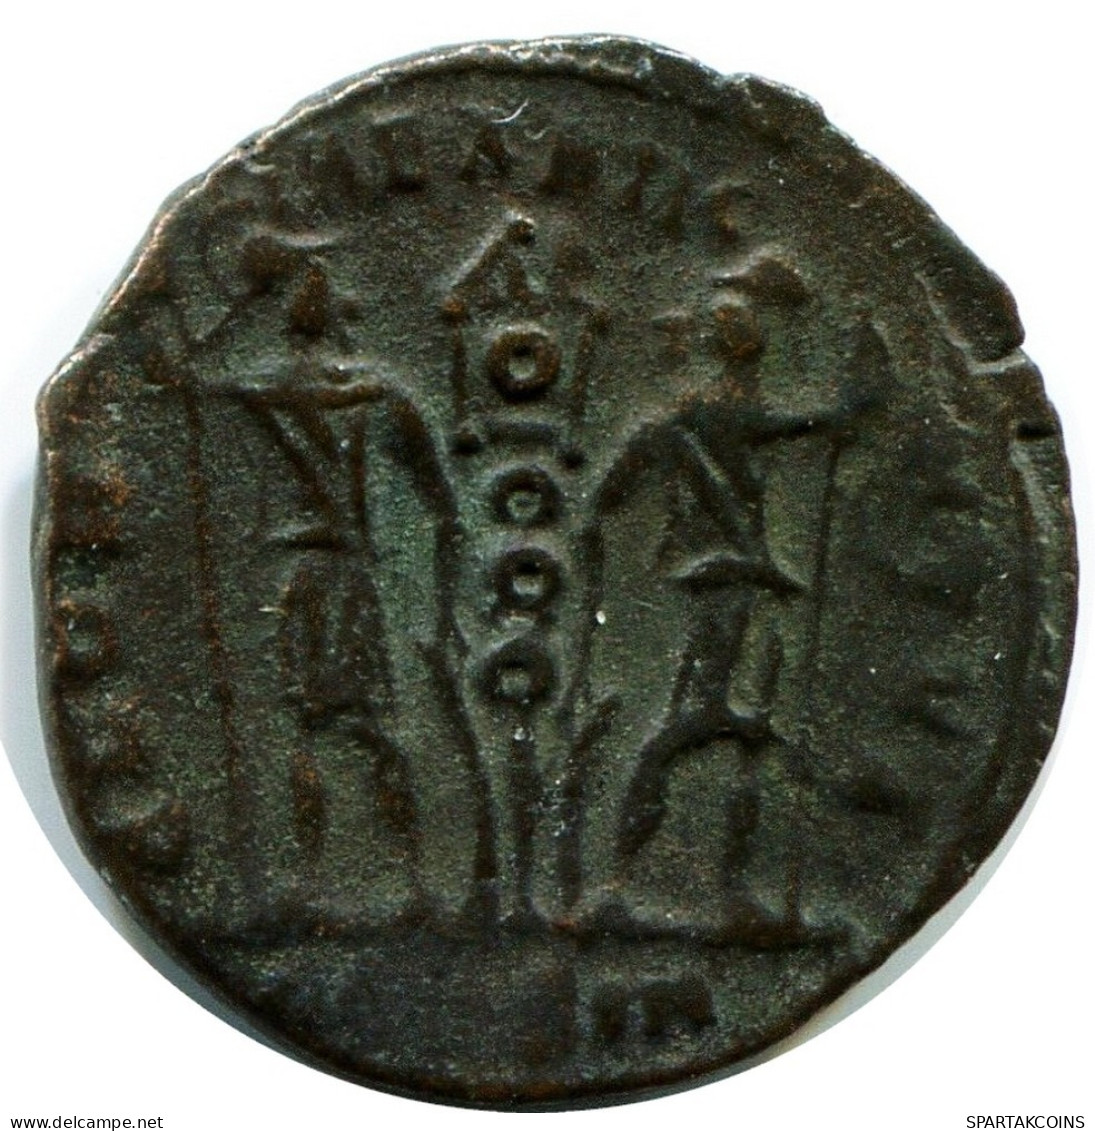 CONSTANS MINTED IN CONSTANTINOPLE FOUND IN IHNASYAH HOARD EGYPT #ANC11958.14.D.A - The Christian Empire (307 AD Tot 363 AD)